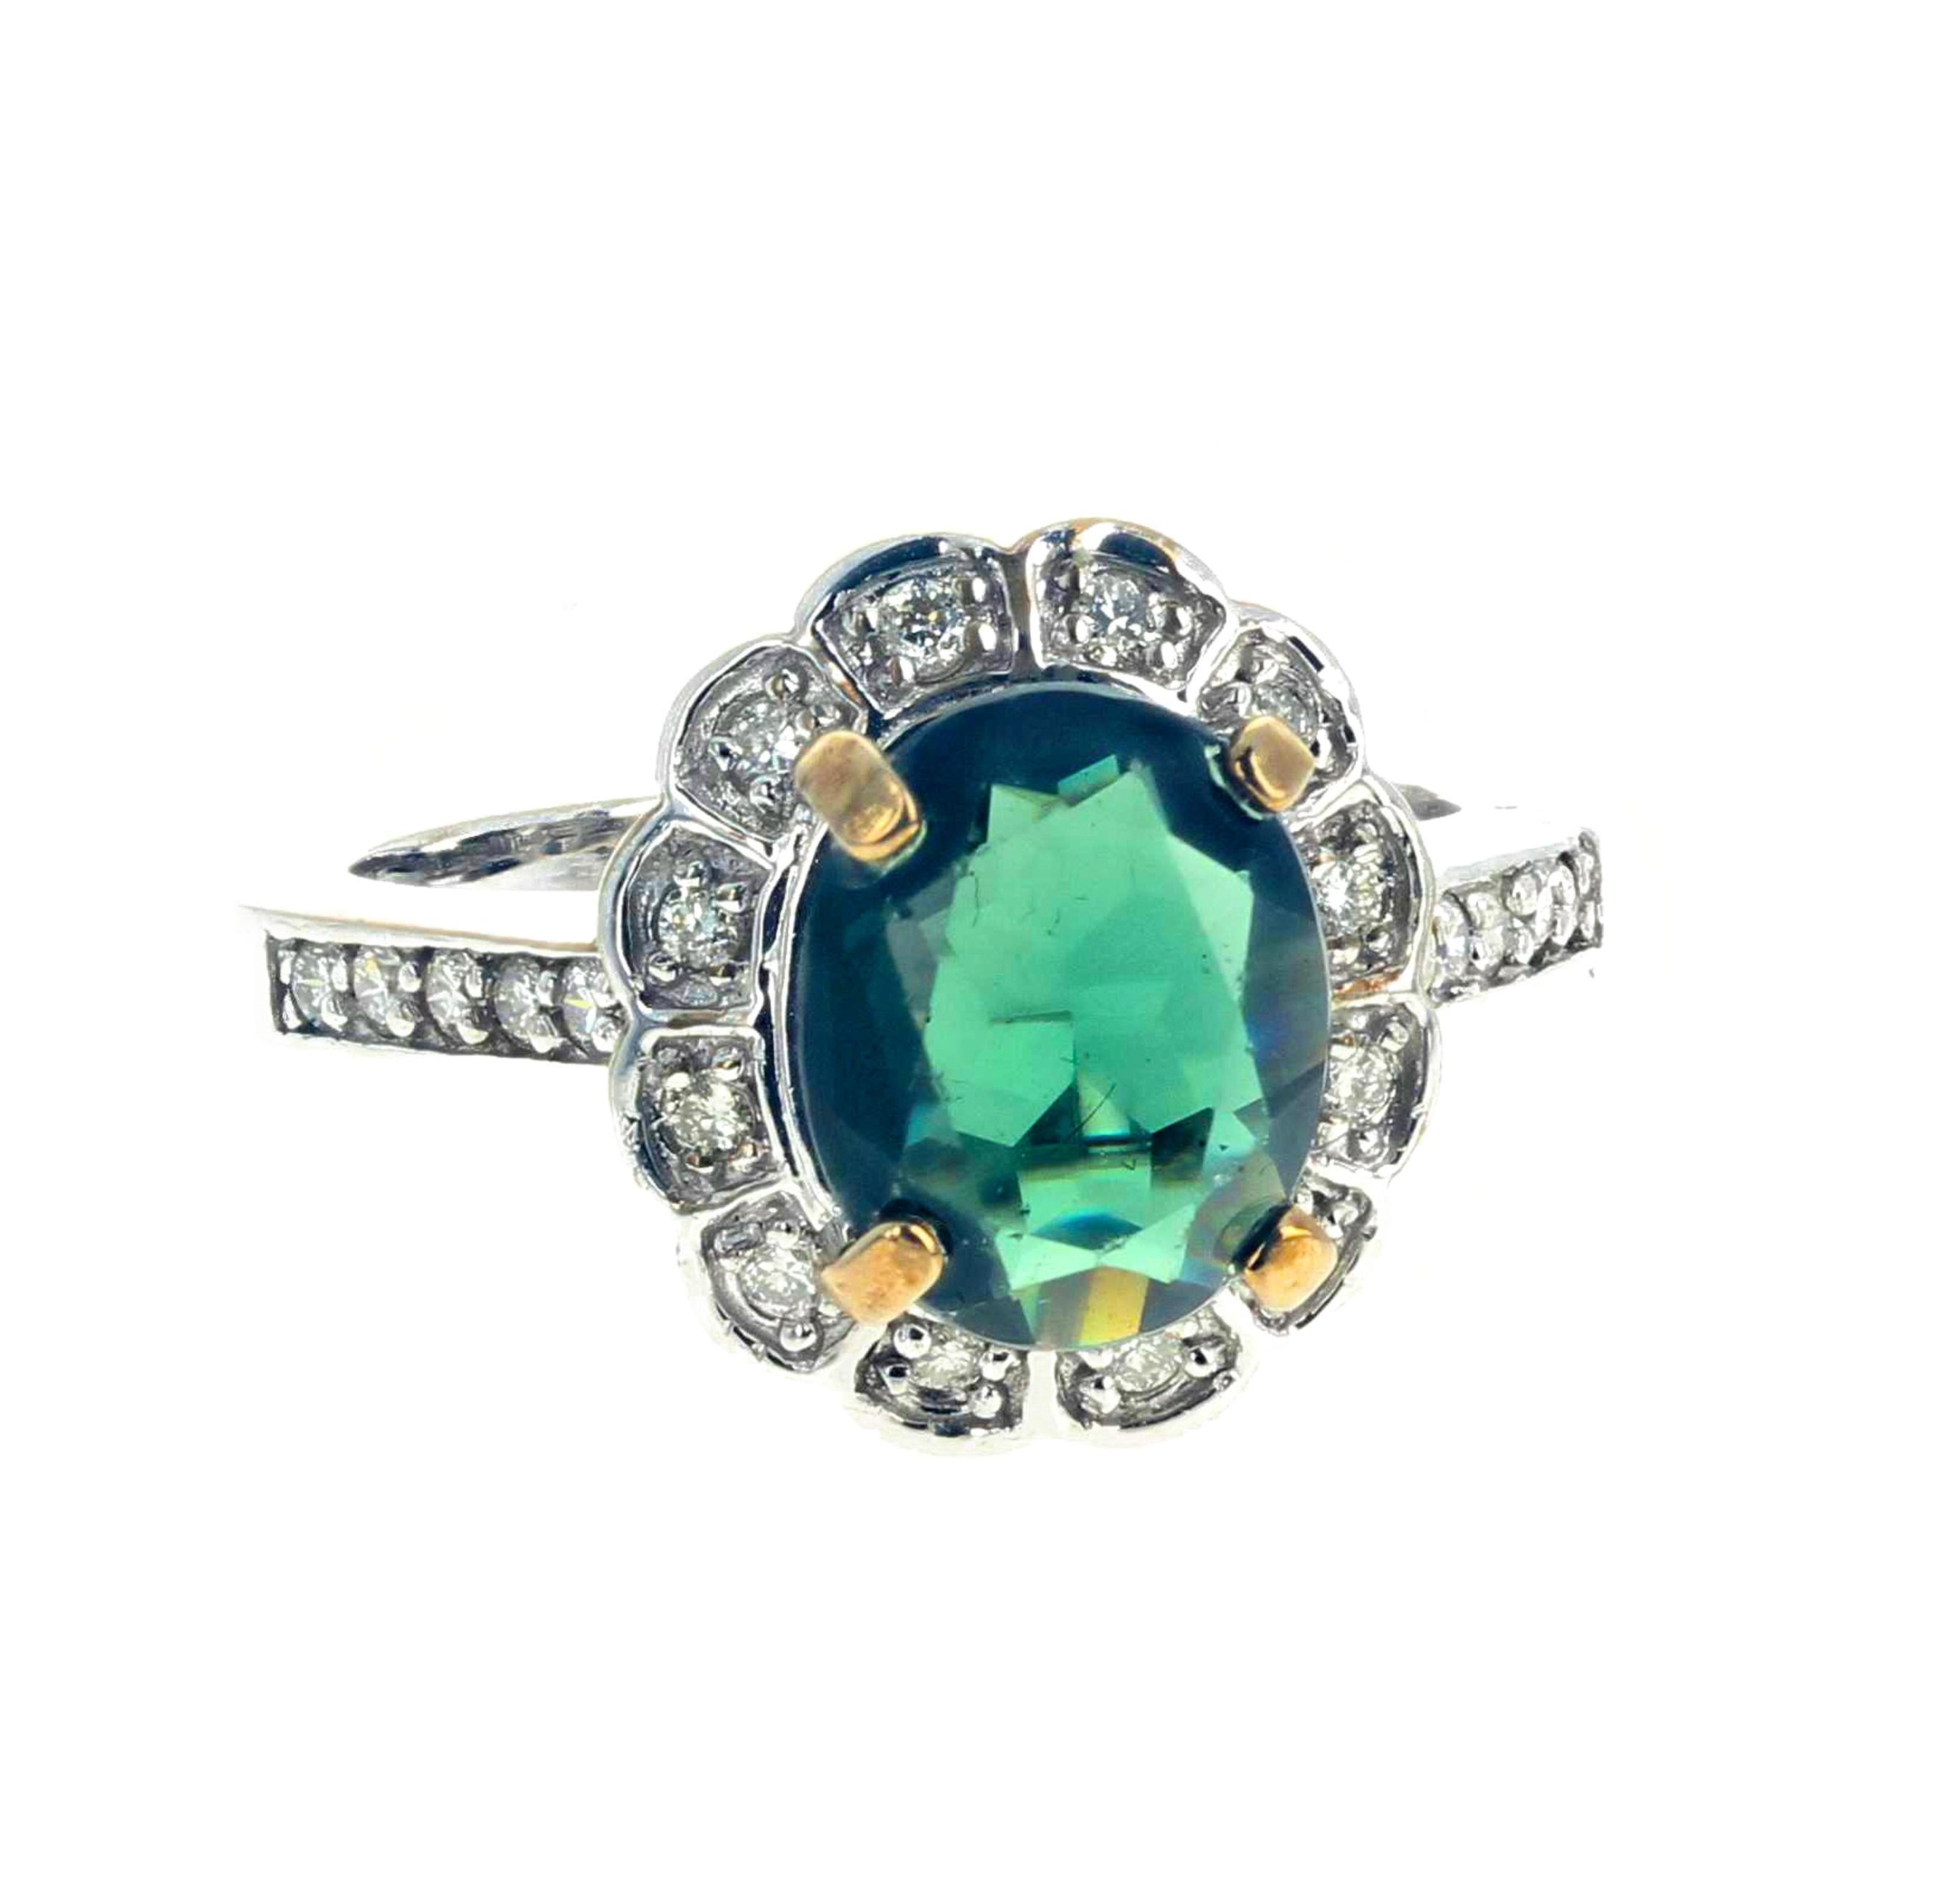 AJD Intensely Glowing 2.23 Ct Green Apatite & White Diamonds Ring For Sale 2